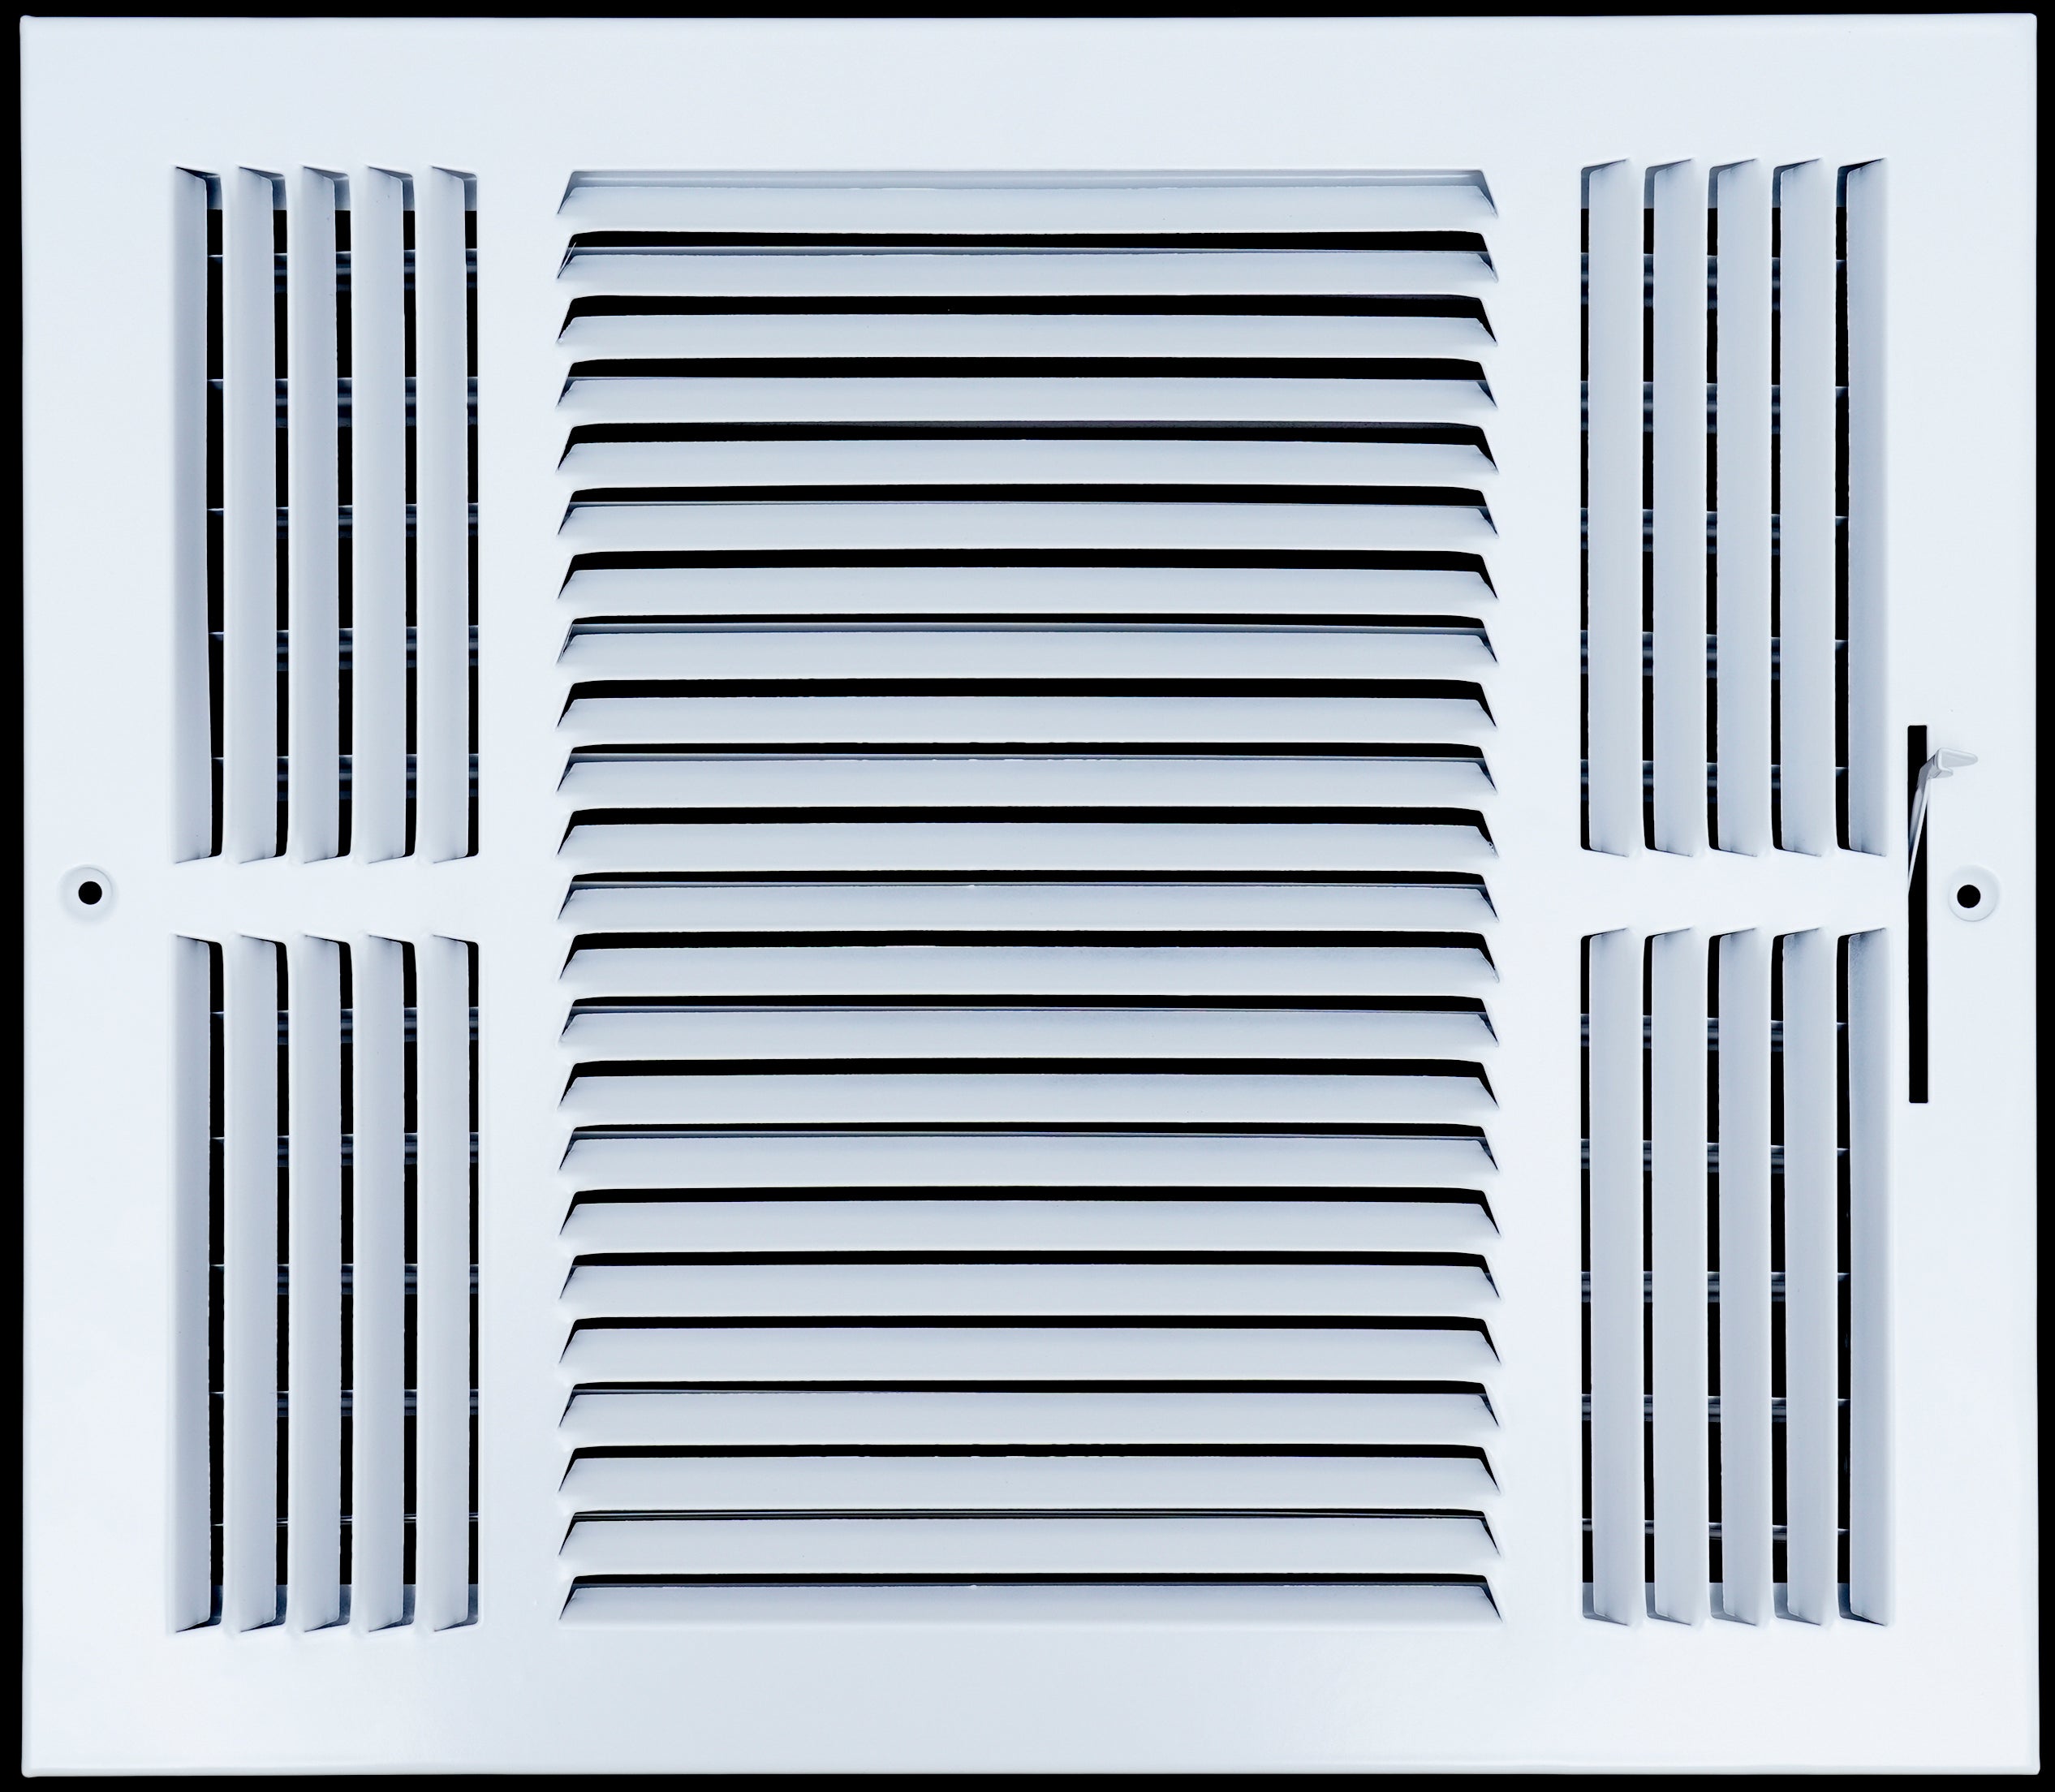 airgrilles 14 x 12 duct opening  -  3 way steel air supply diffuser for sidewall and ceiling hnd-asg-wh-3way-14x12 764613097795 - 1